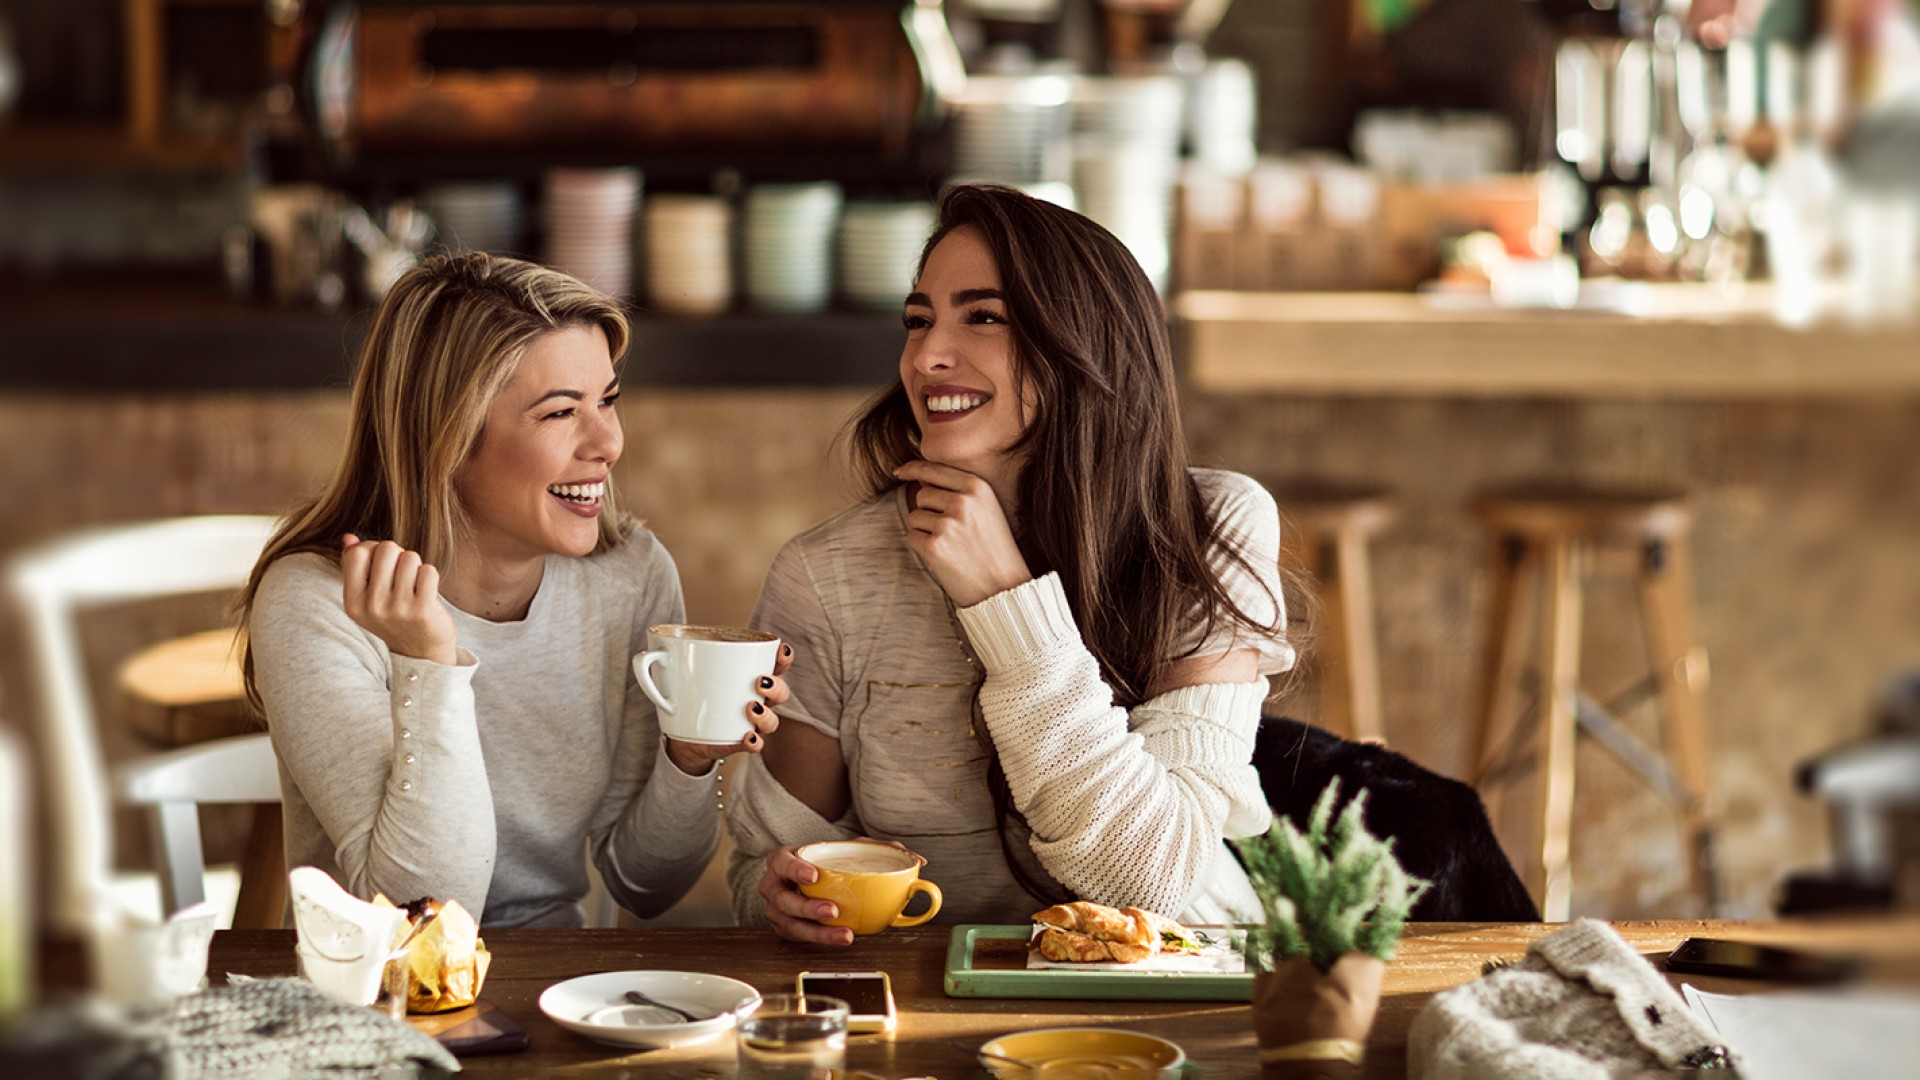 Two cheerful women having fun during coffee time in a cafe.